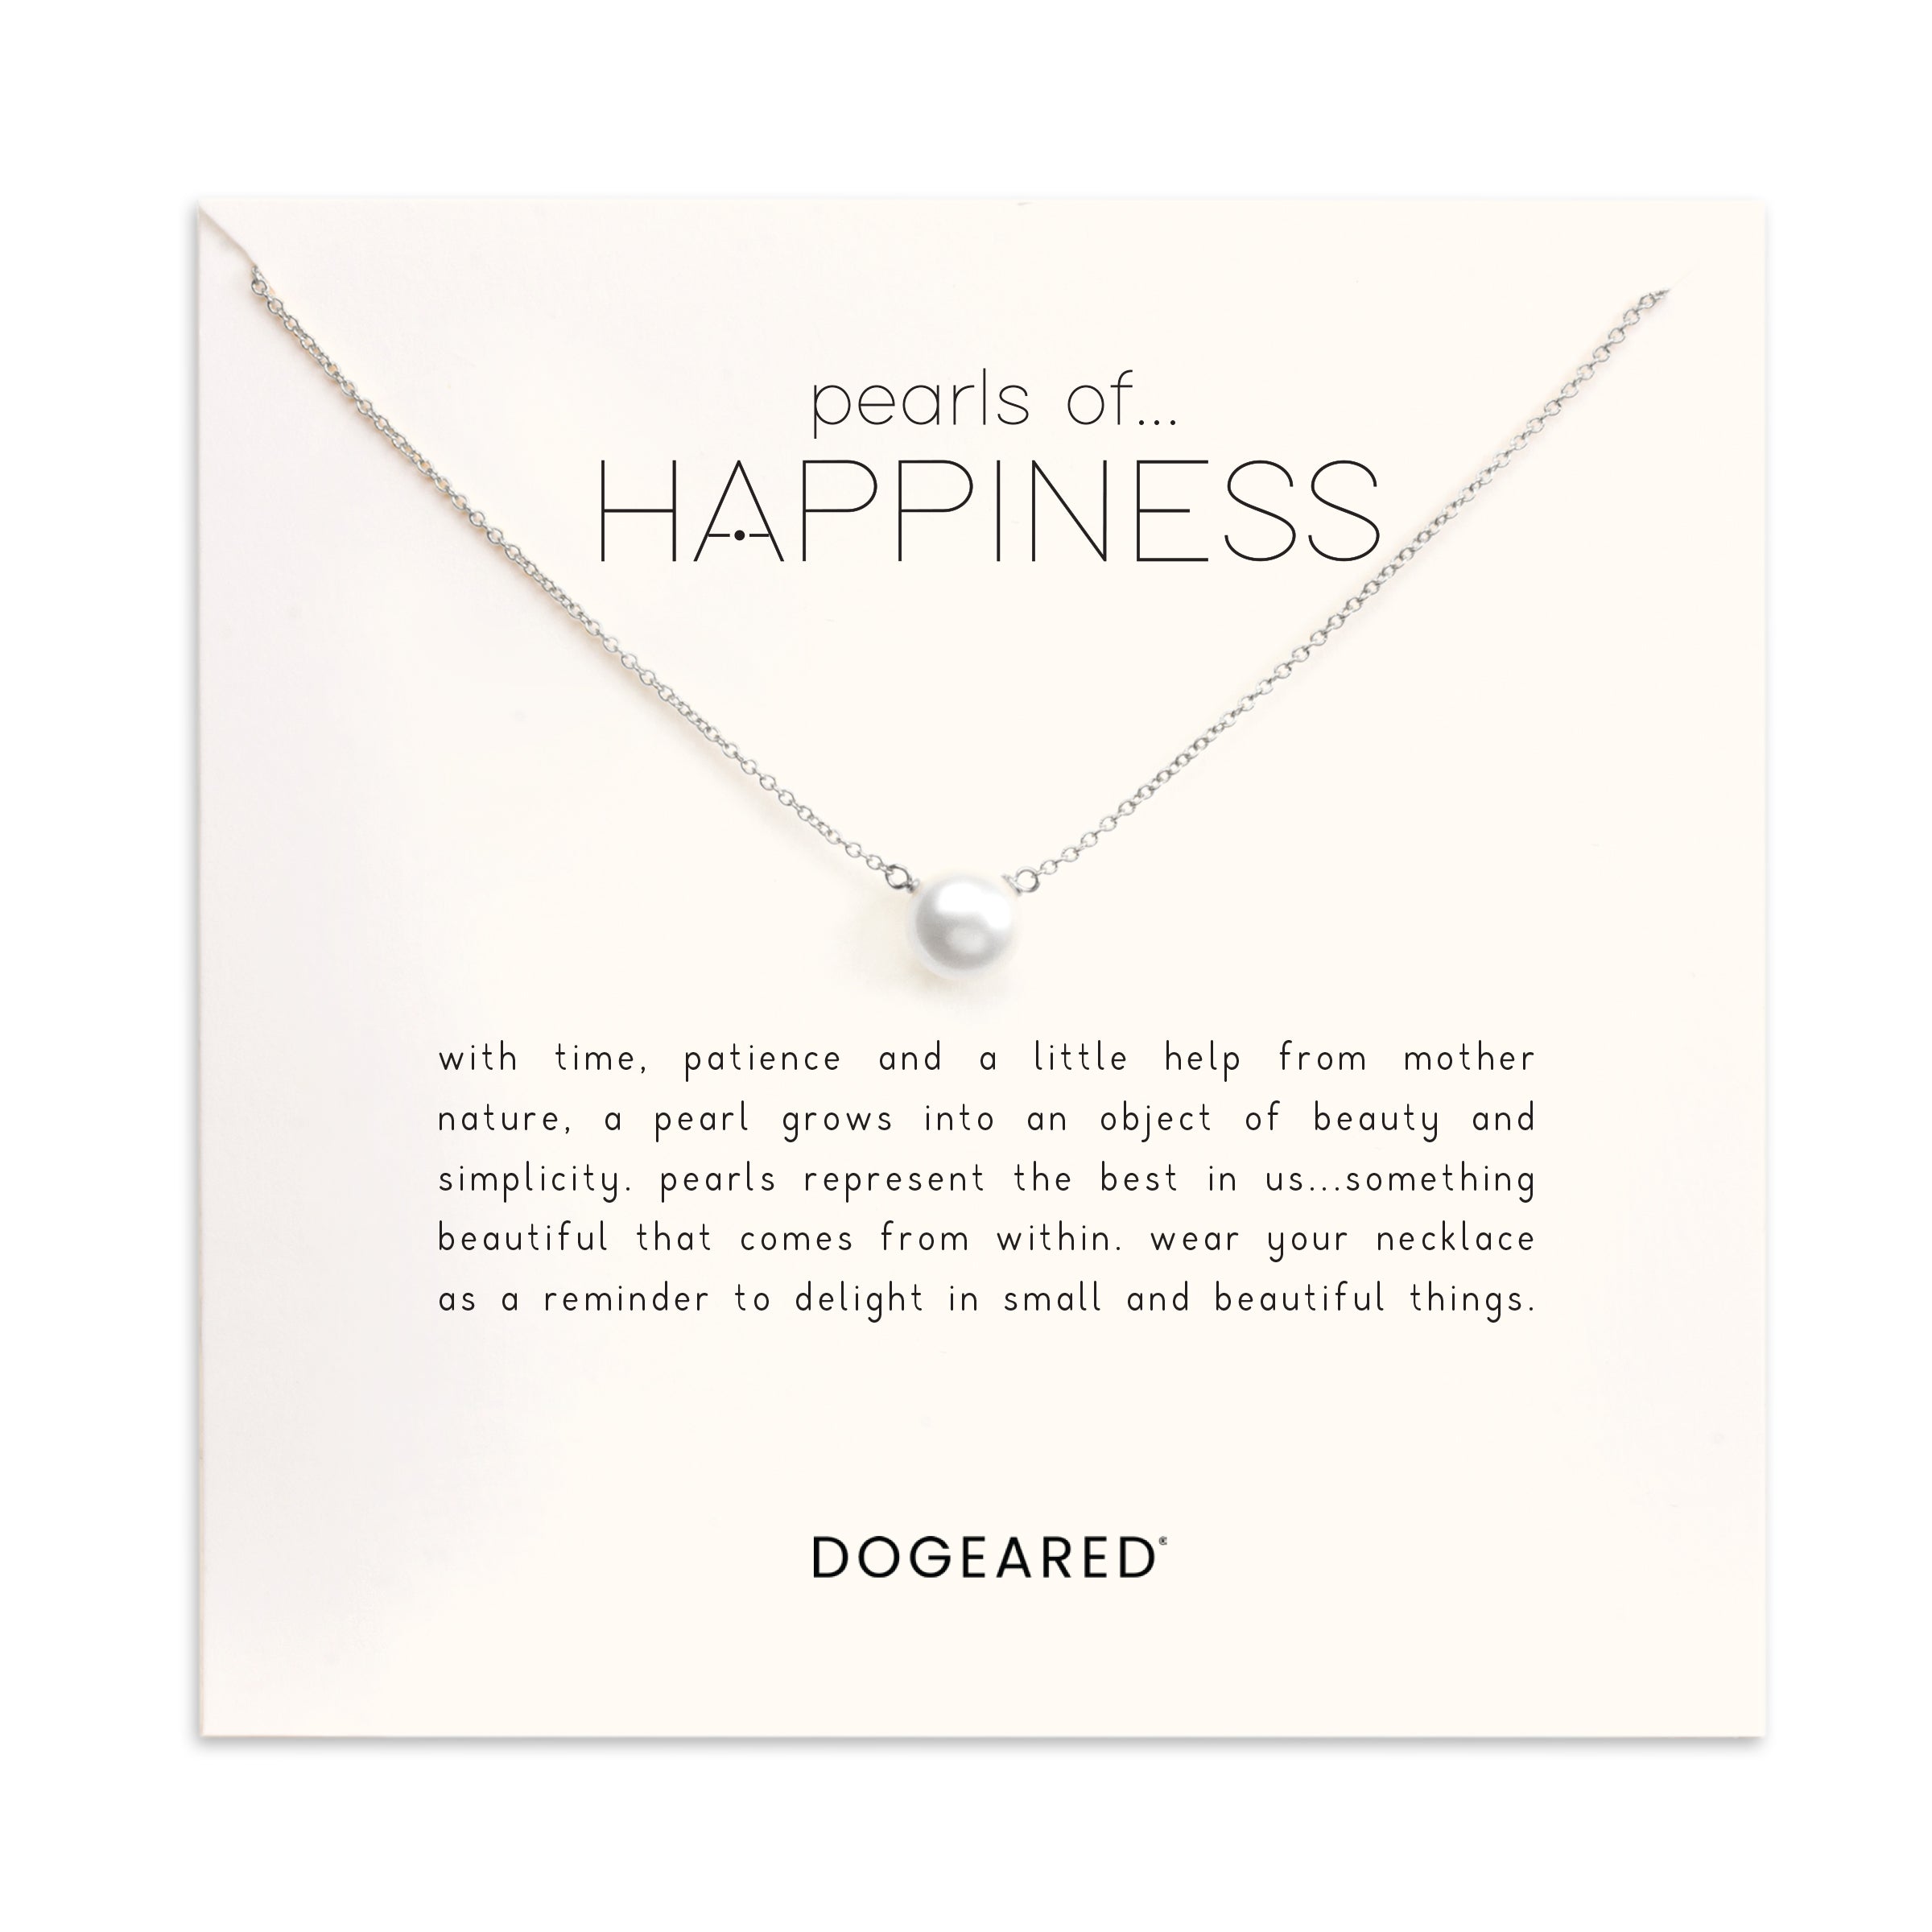 Pearls of happiness large white pearl necklace - Dogeared